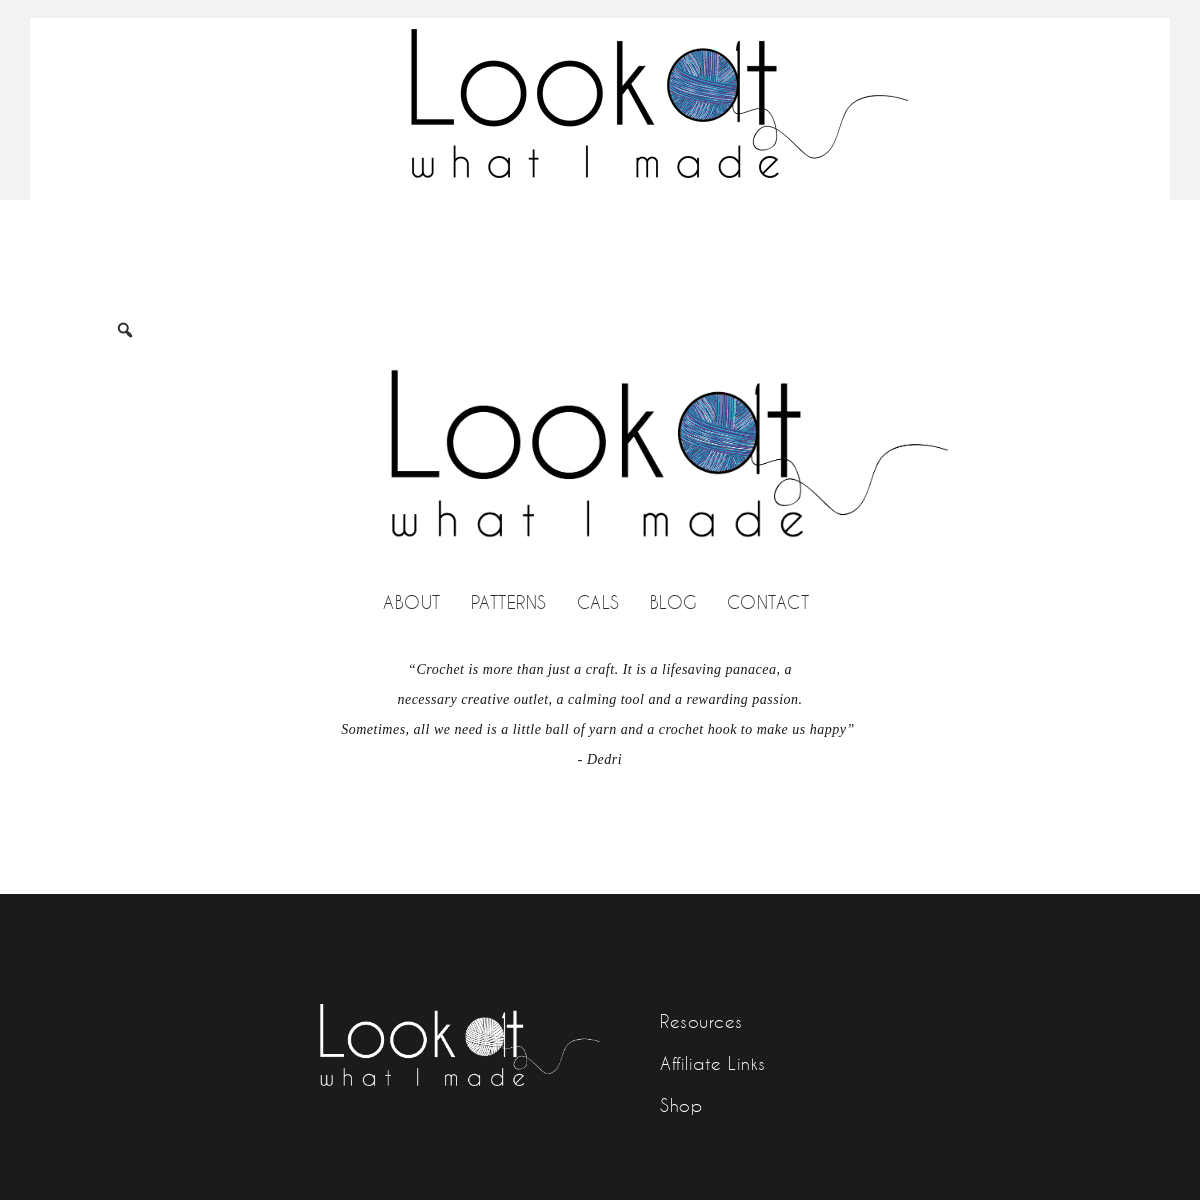 A complete backup of lookatwhatimade.net